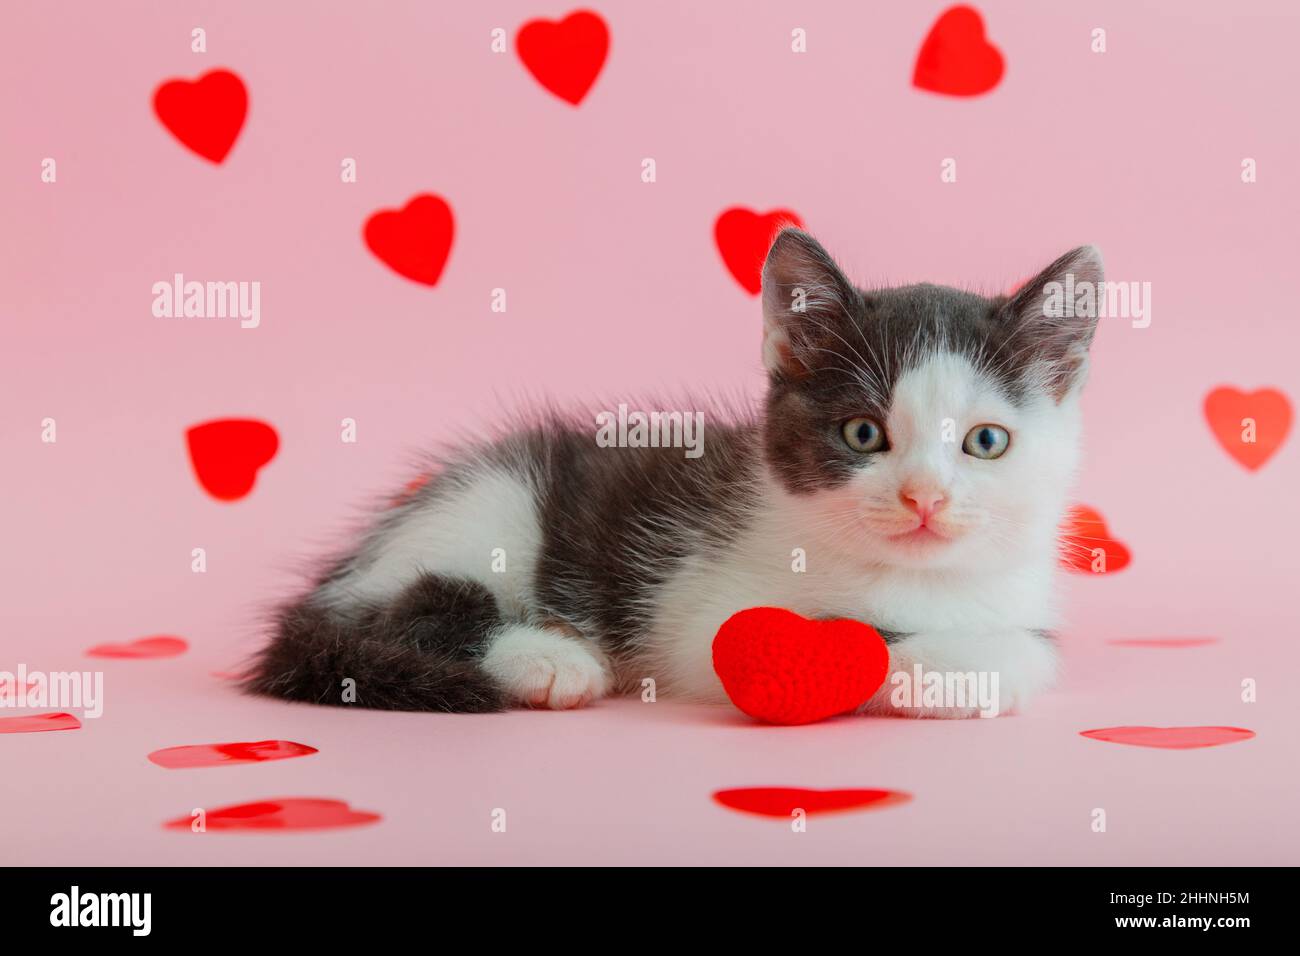 Cute Spotted black white kitten Holds in paw hug plush red heart as symbol of love, present gift Valentine's Day Isolated on pink color background Stock Photo